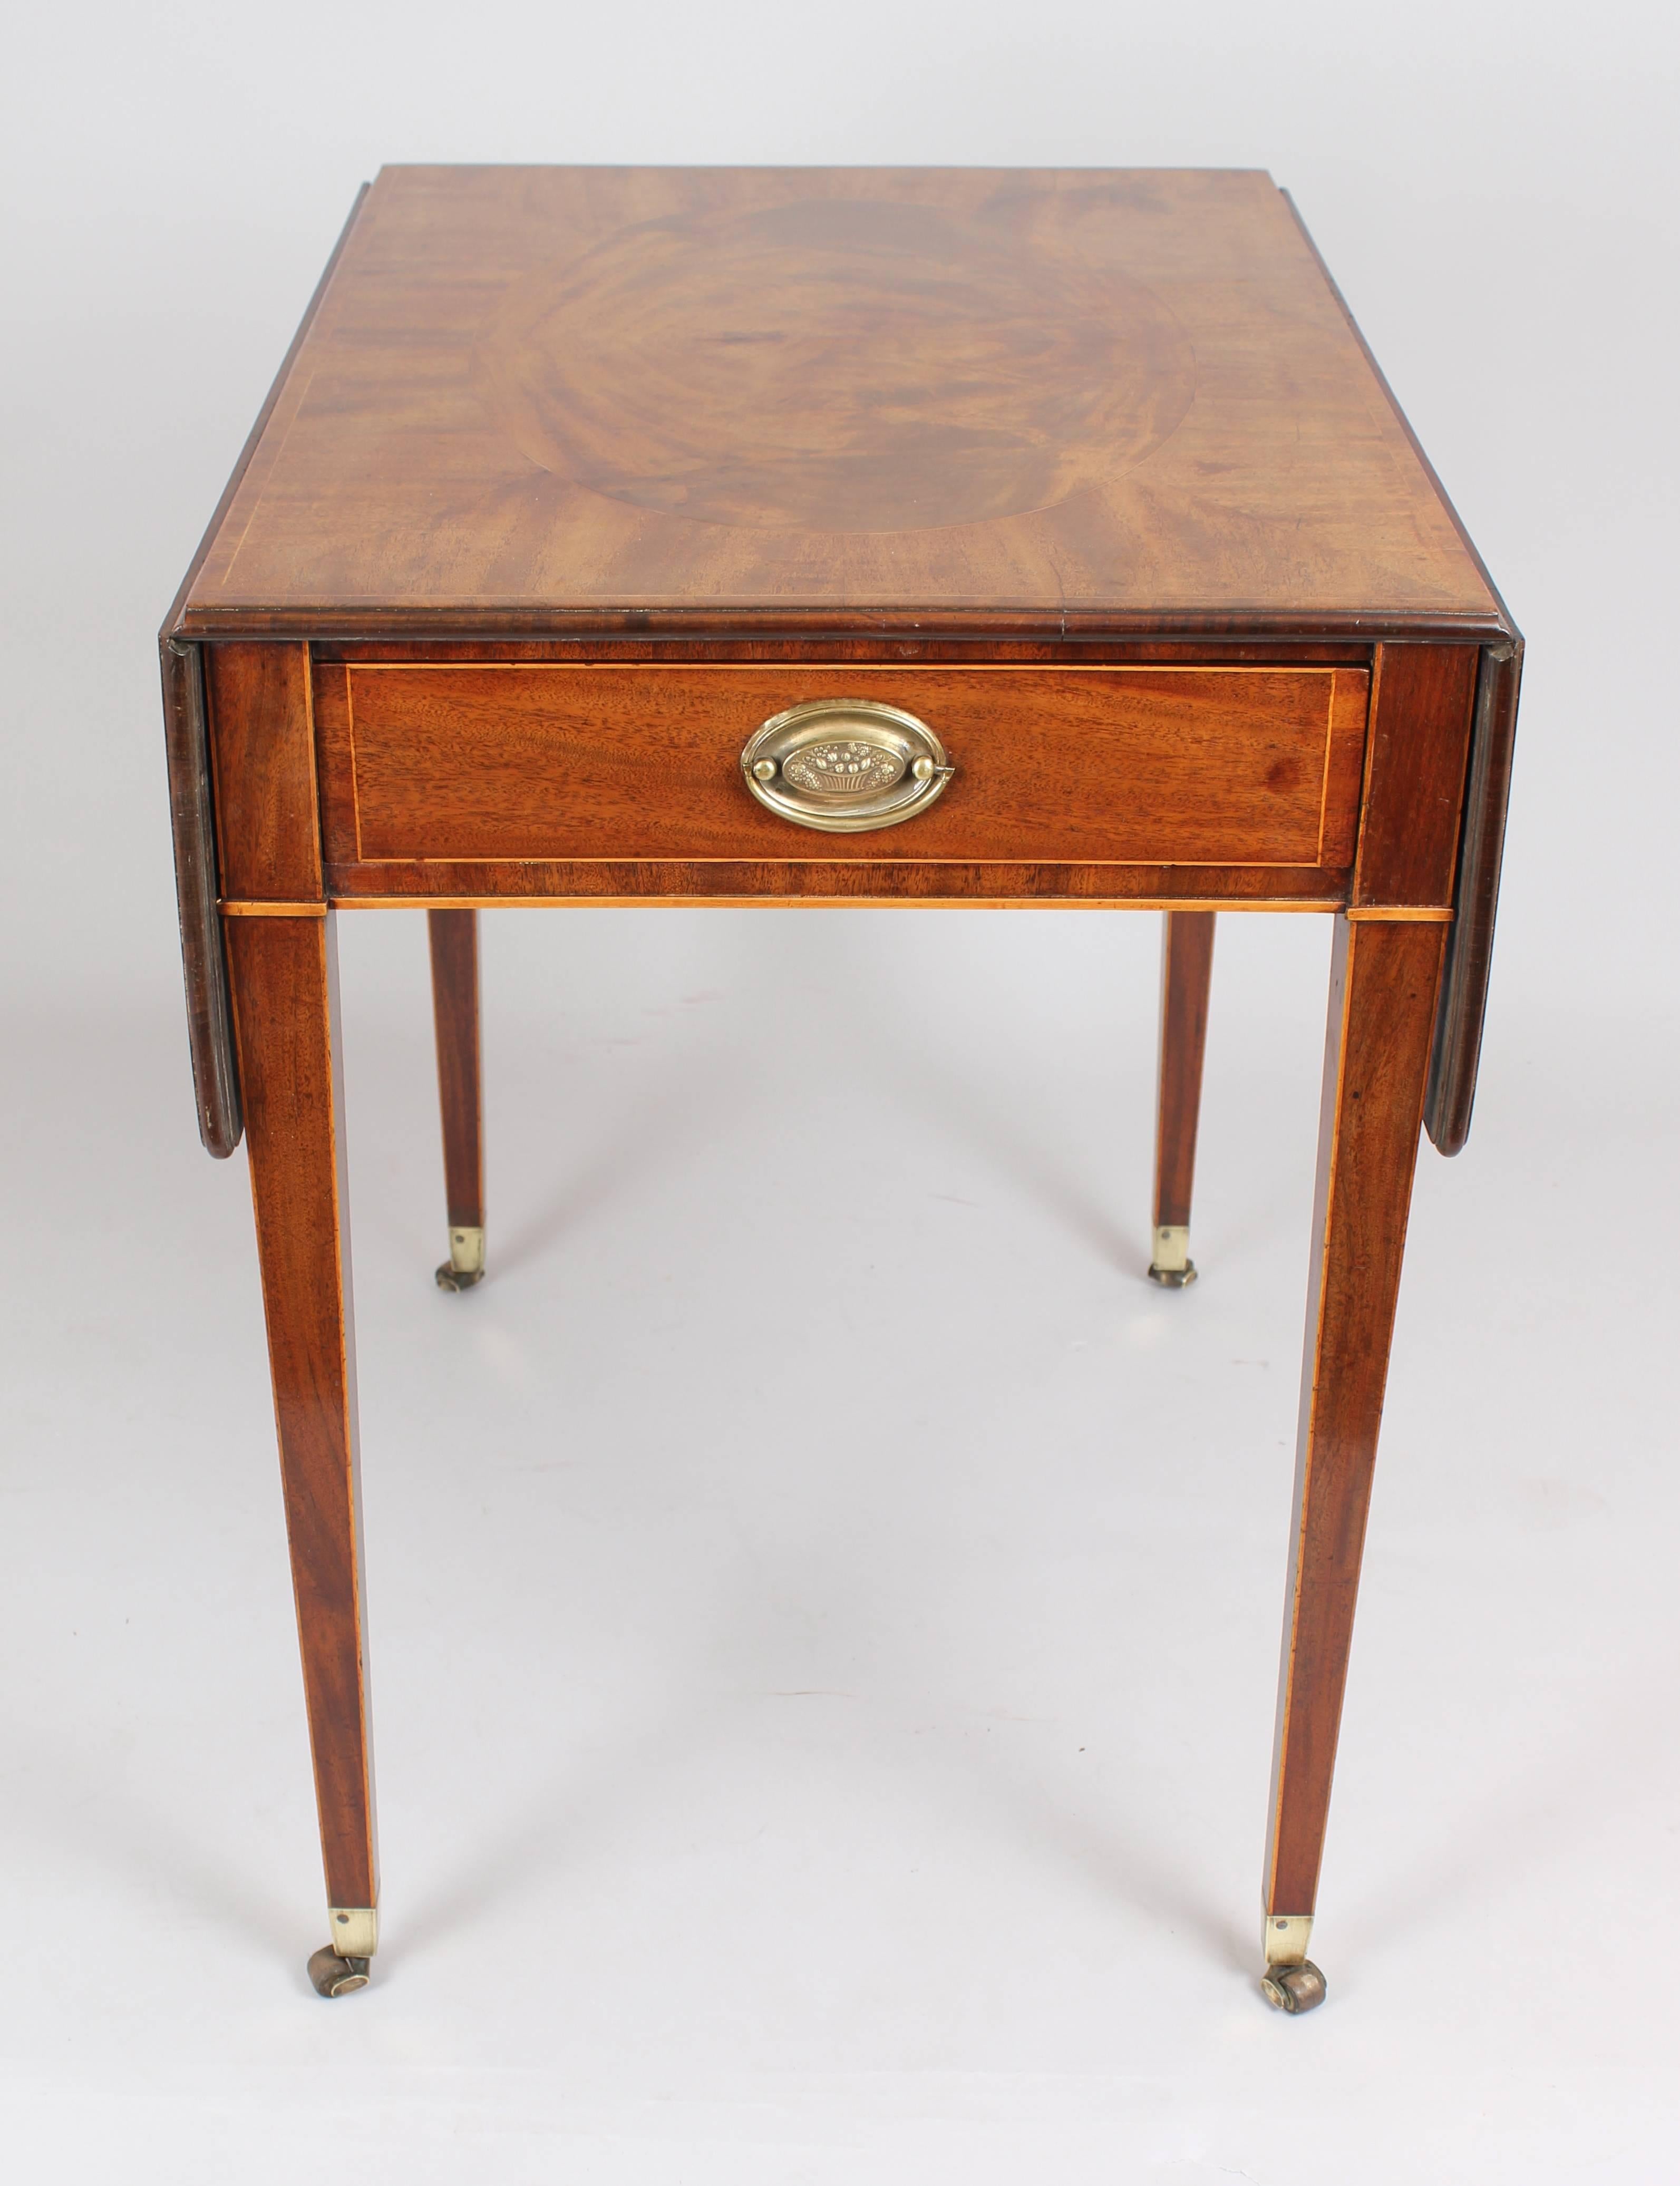 Fine George III period mahogany Pembroke table; the top and leaves each inlaid with an oval pair-veneered panel on a diagonally-veneered ground; fitted with two drawers with later brass oval-plate handles, on square legs with original brass